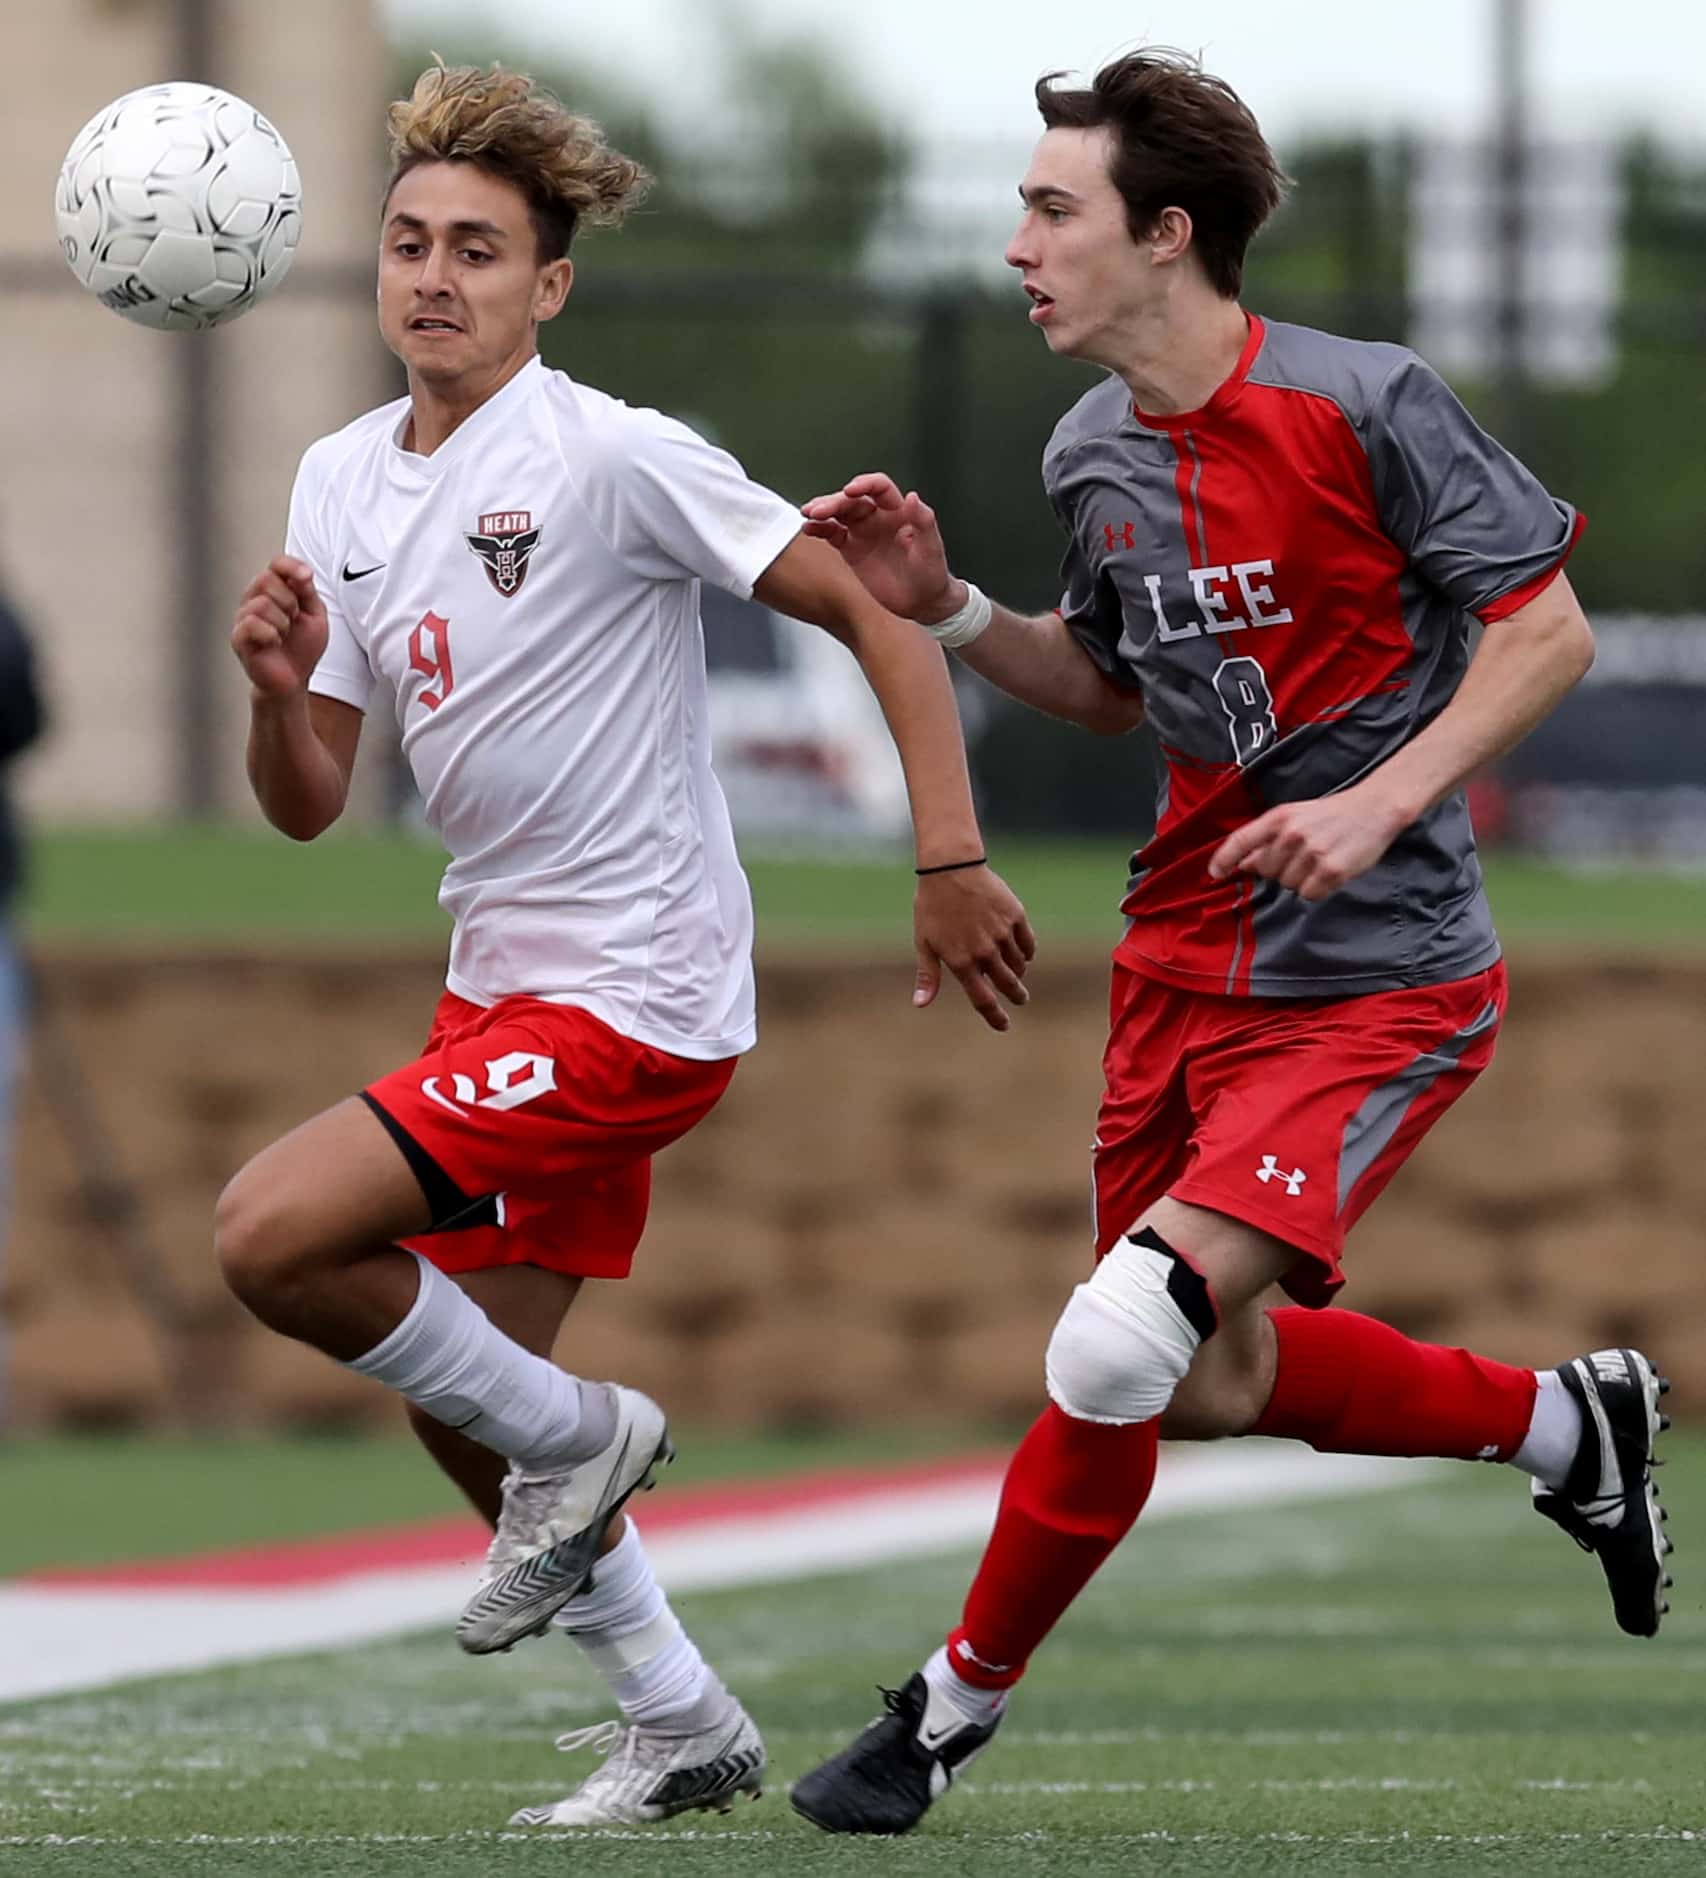 Rockwall-Heath's Chuy Ruiz (9) and SA Lee's Gavin Seesholtz (8) chase after the ball during...